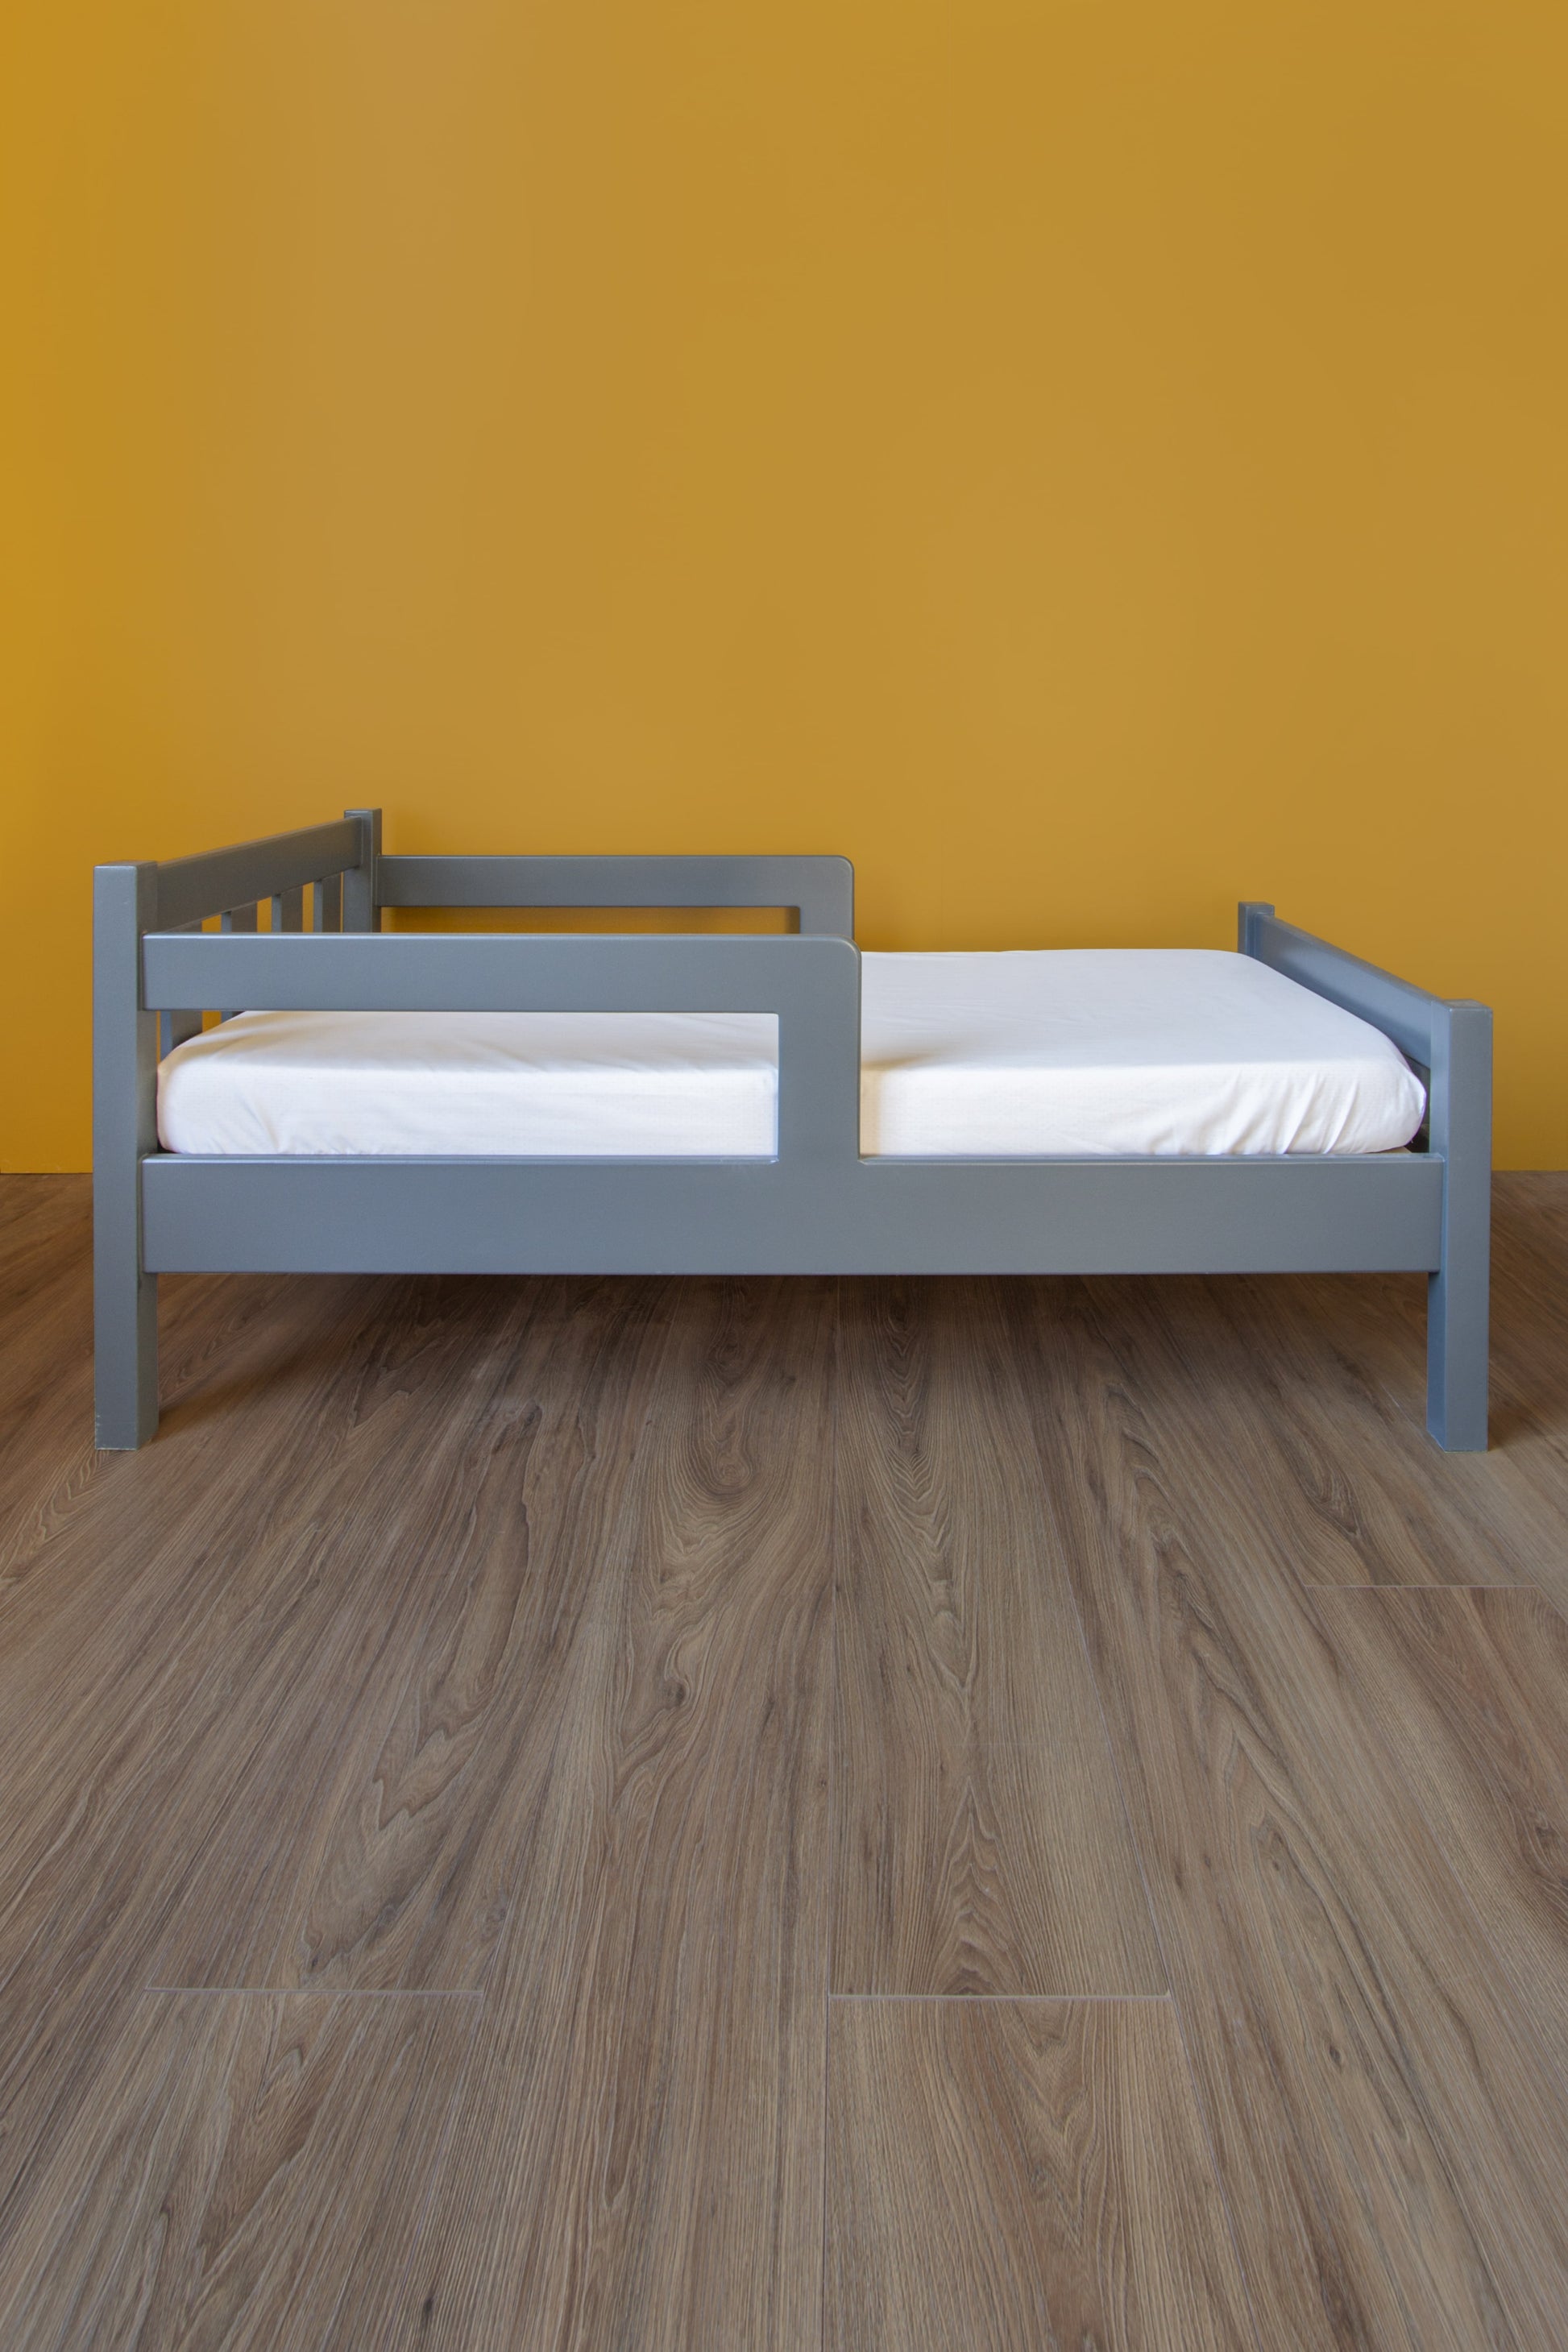 Stardust toddler bed - The Room